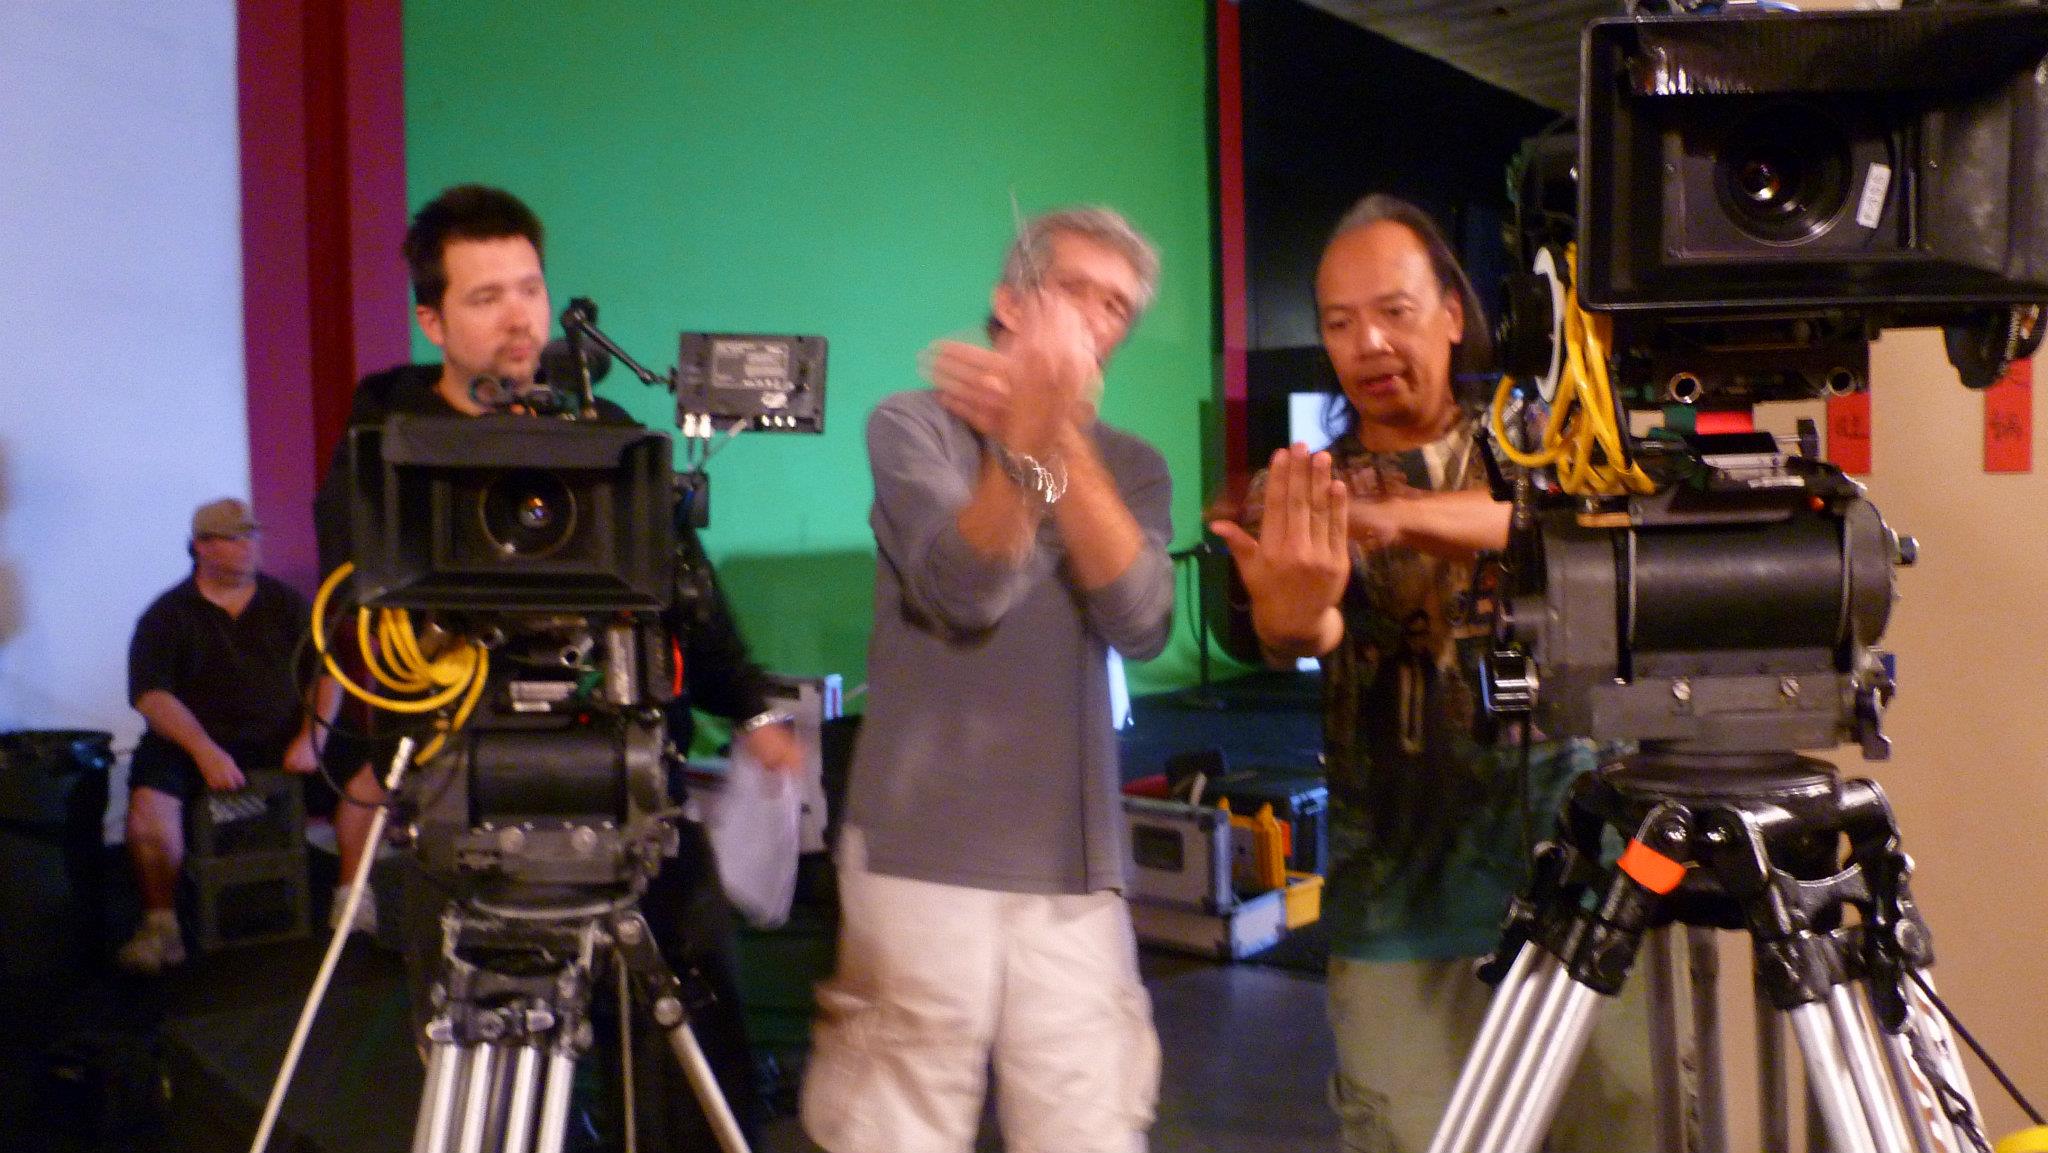 FIRST A.D on the short -comedy/kung fu film entitled Kung Food Fight